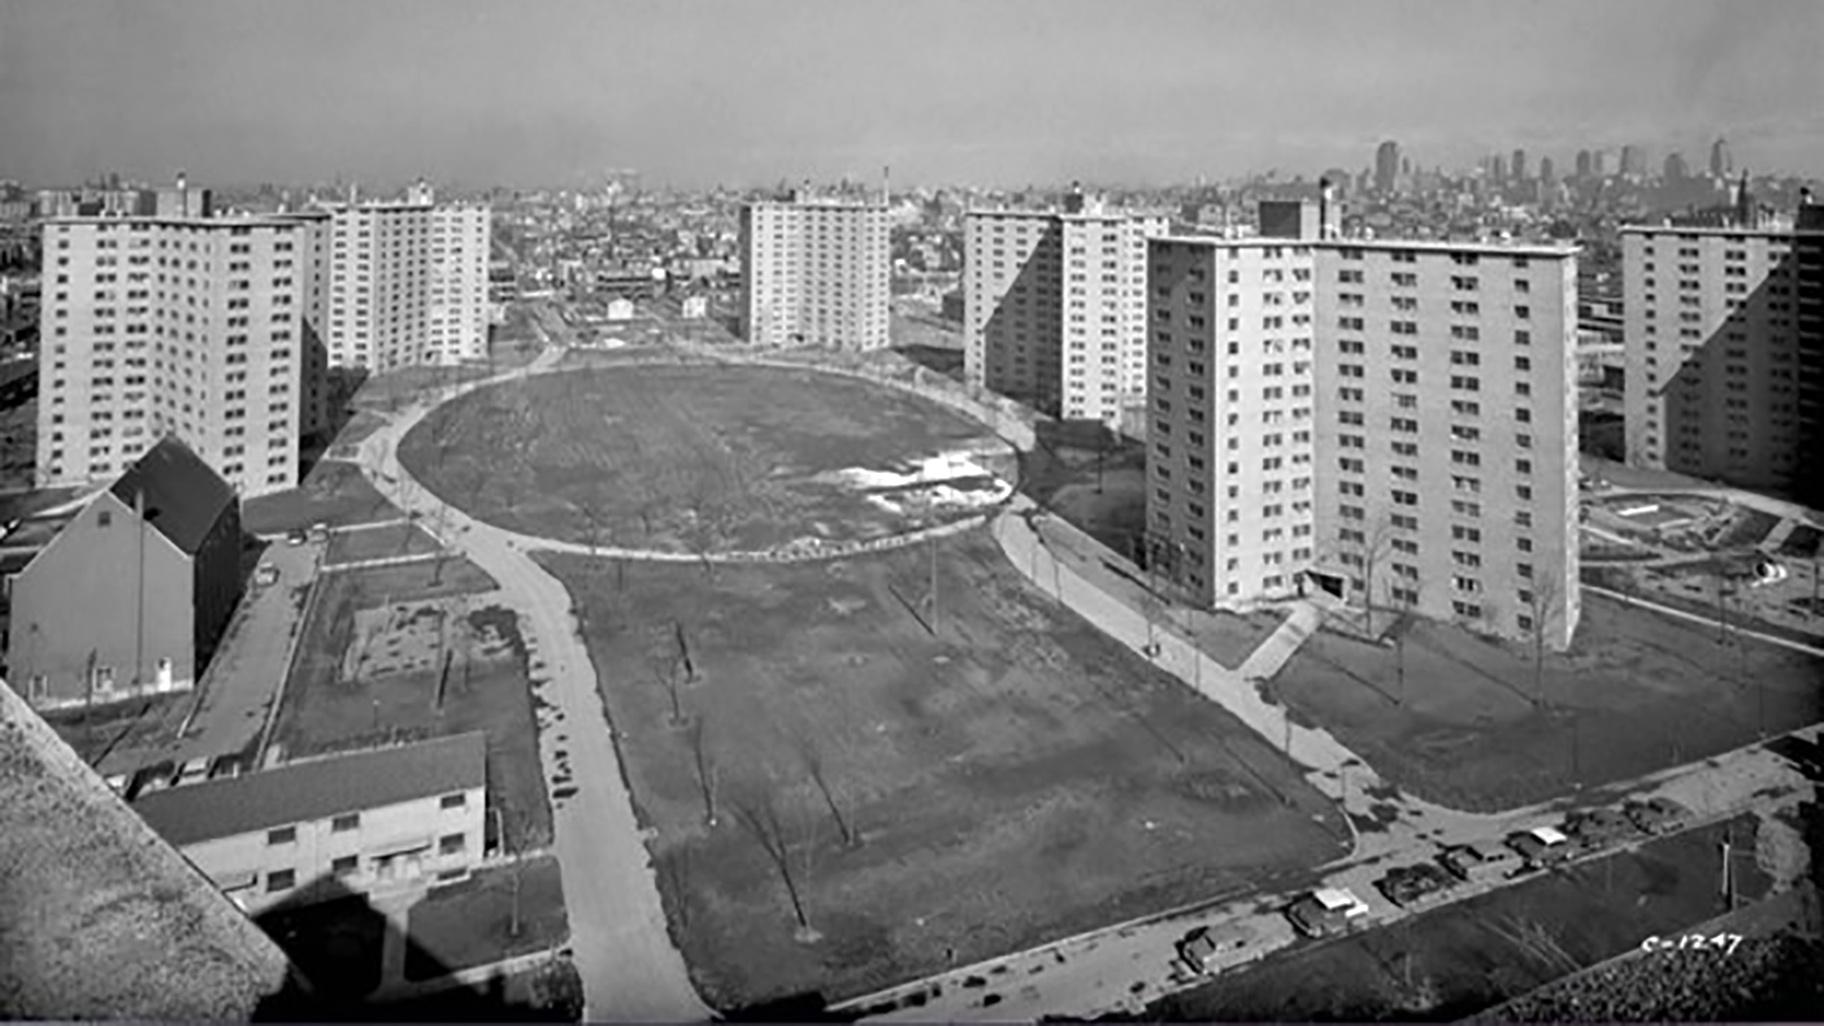 The Grace Abbott Homes c. 1970 (Digital image collection, Special Collections and University Archives, University of Illinois, Chicago)